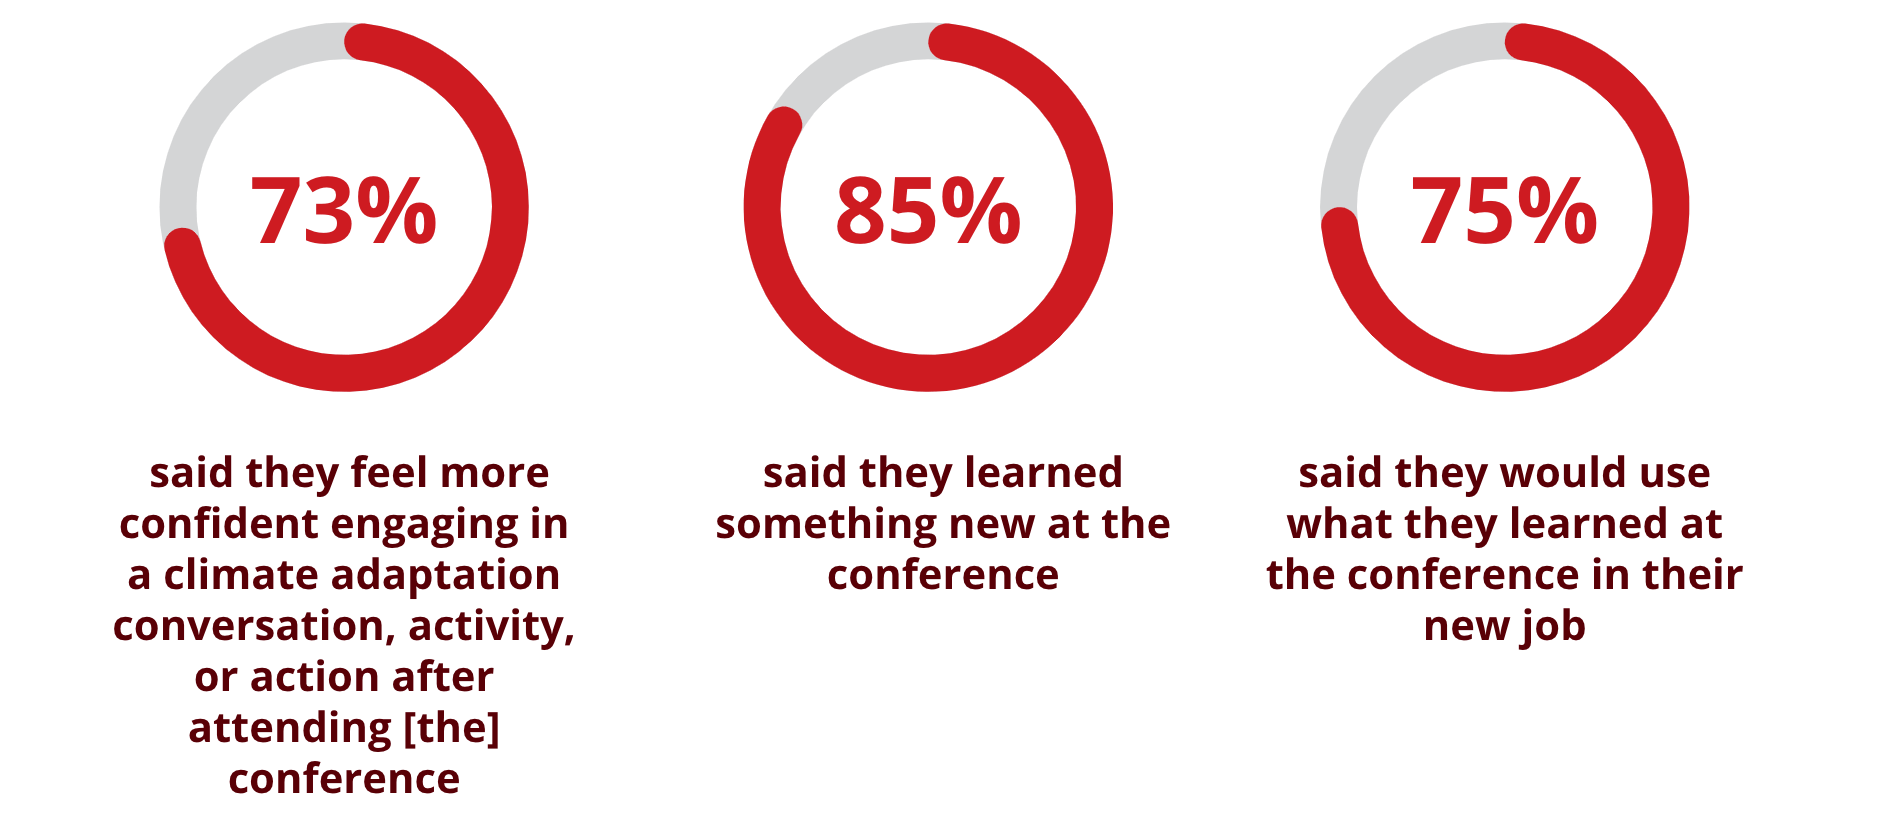 85% said they learned something new